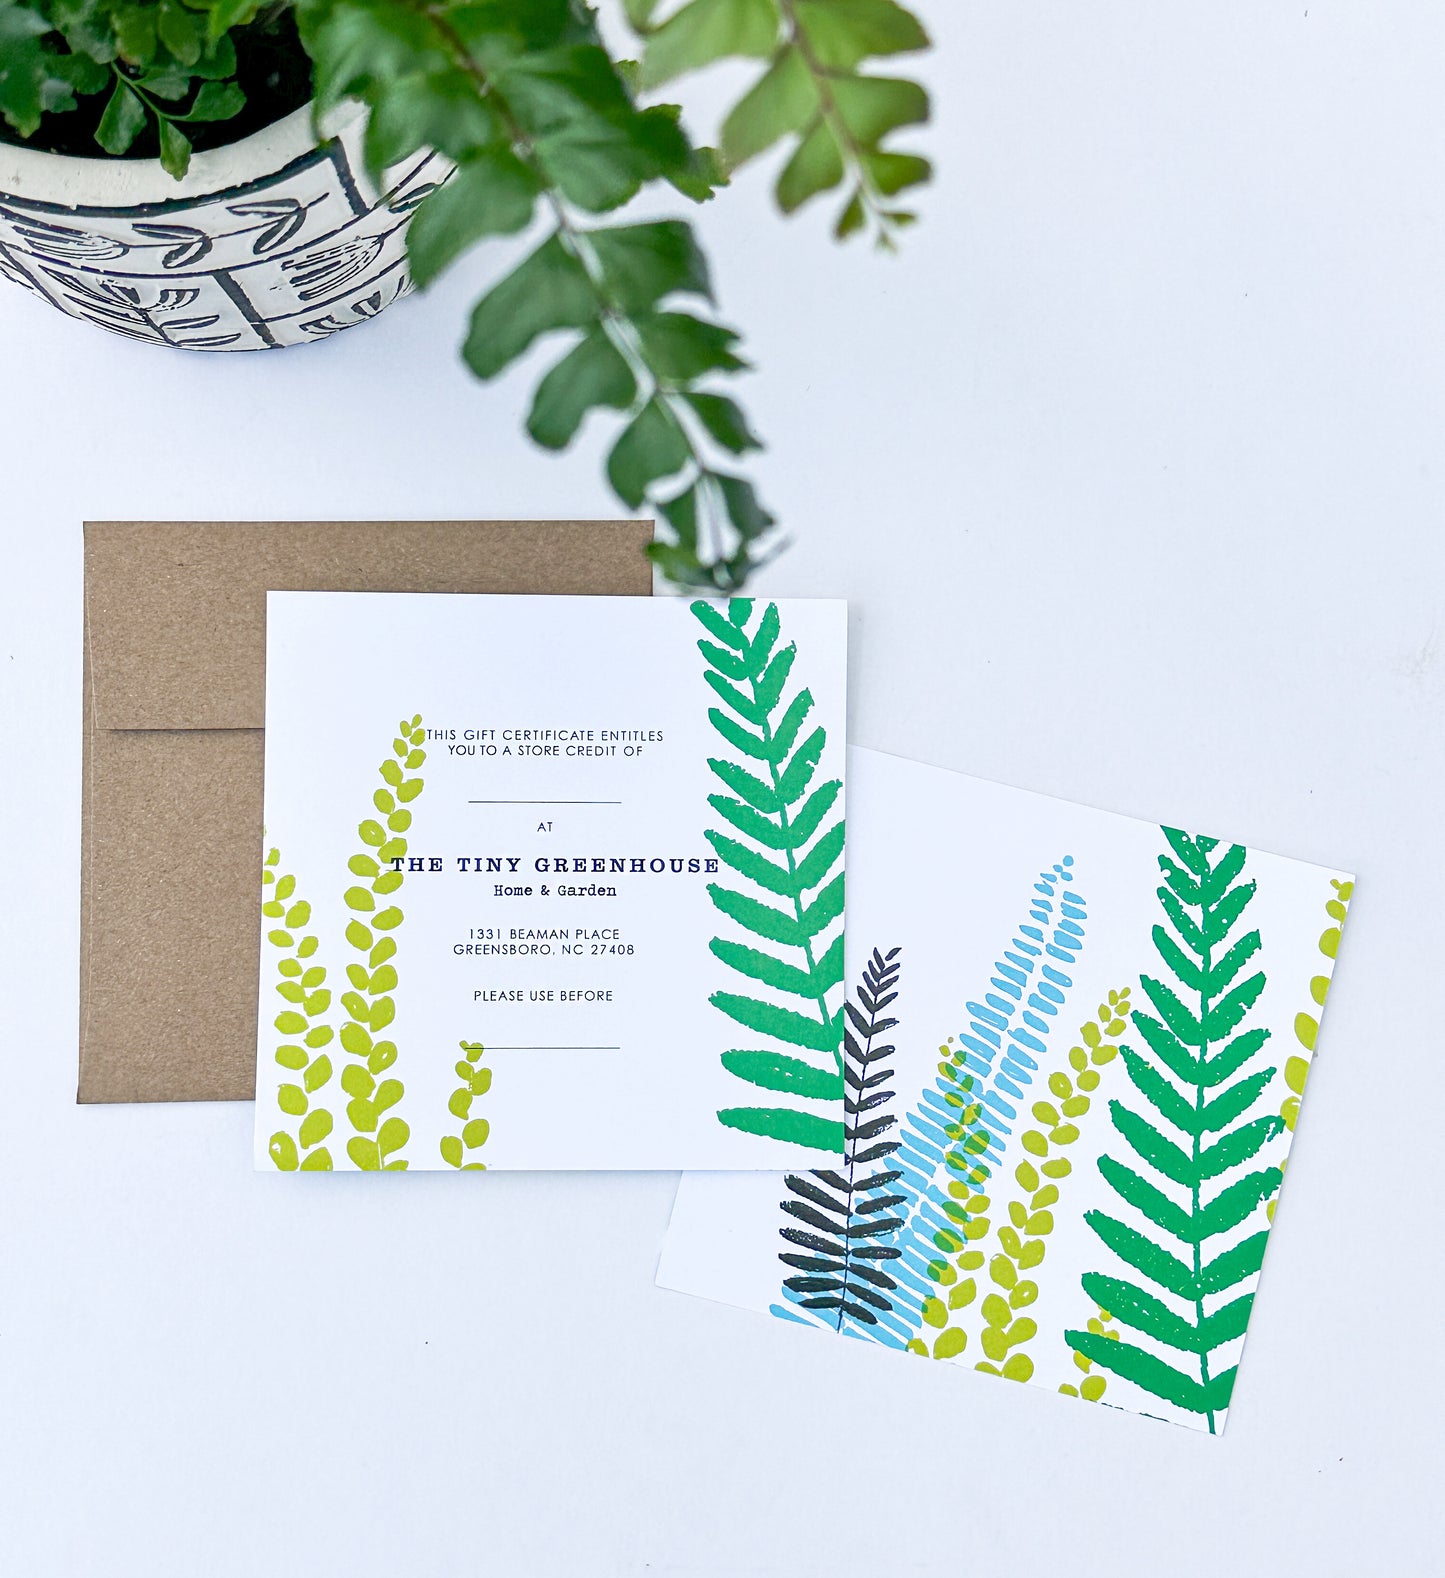 Gift Certificate for The Tiny Greenhouse